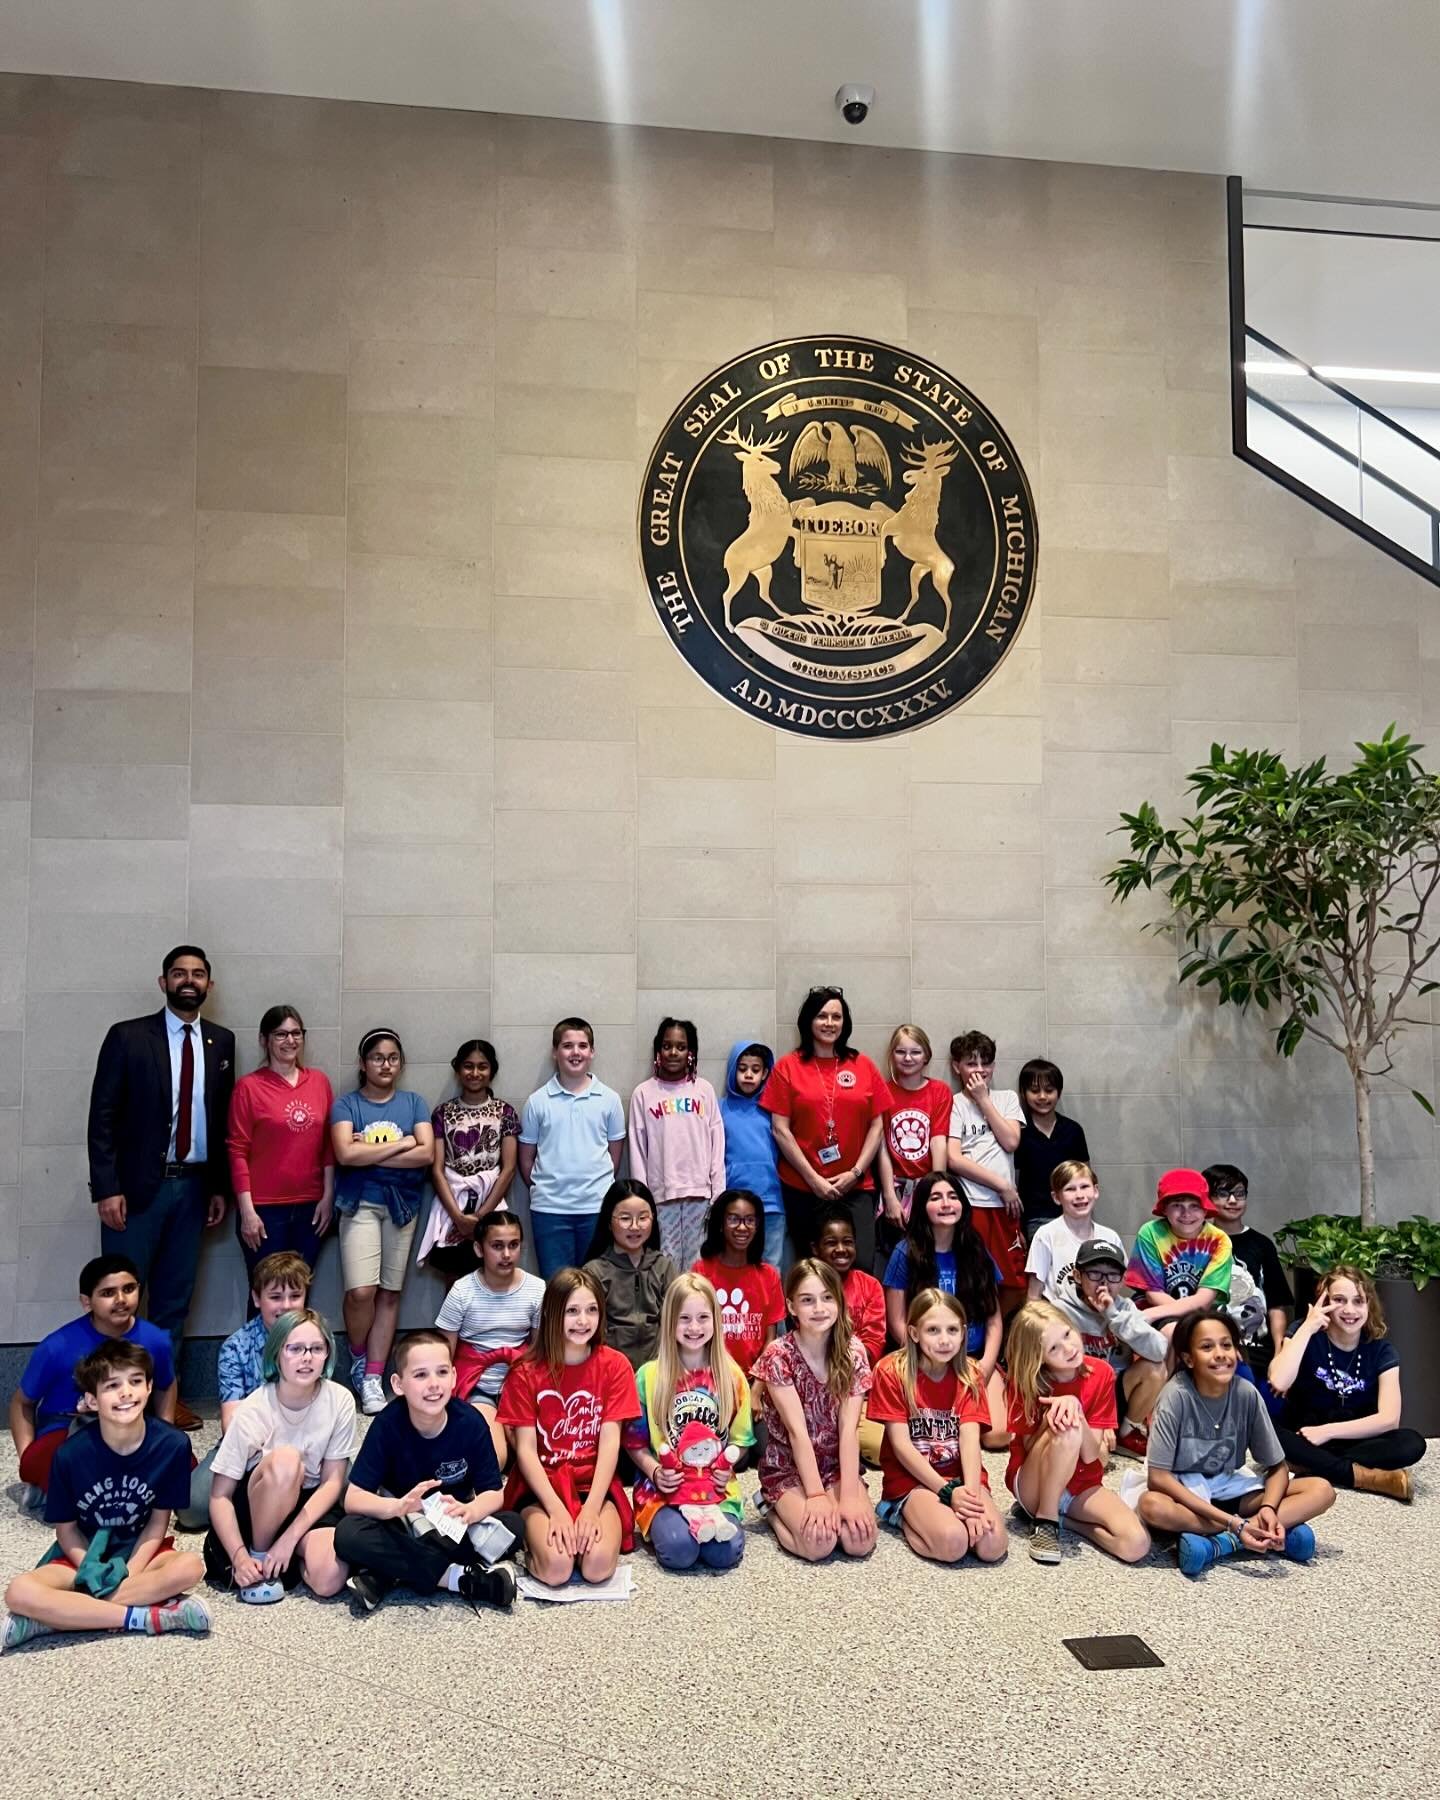 Canton was in the House today!  It was great to catching up with my fourth grade constituents from Bentley Elementary. 

The most pressing issue on their minds: how many YouTube subscribers I have!